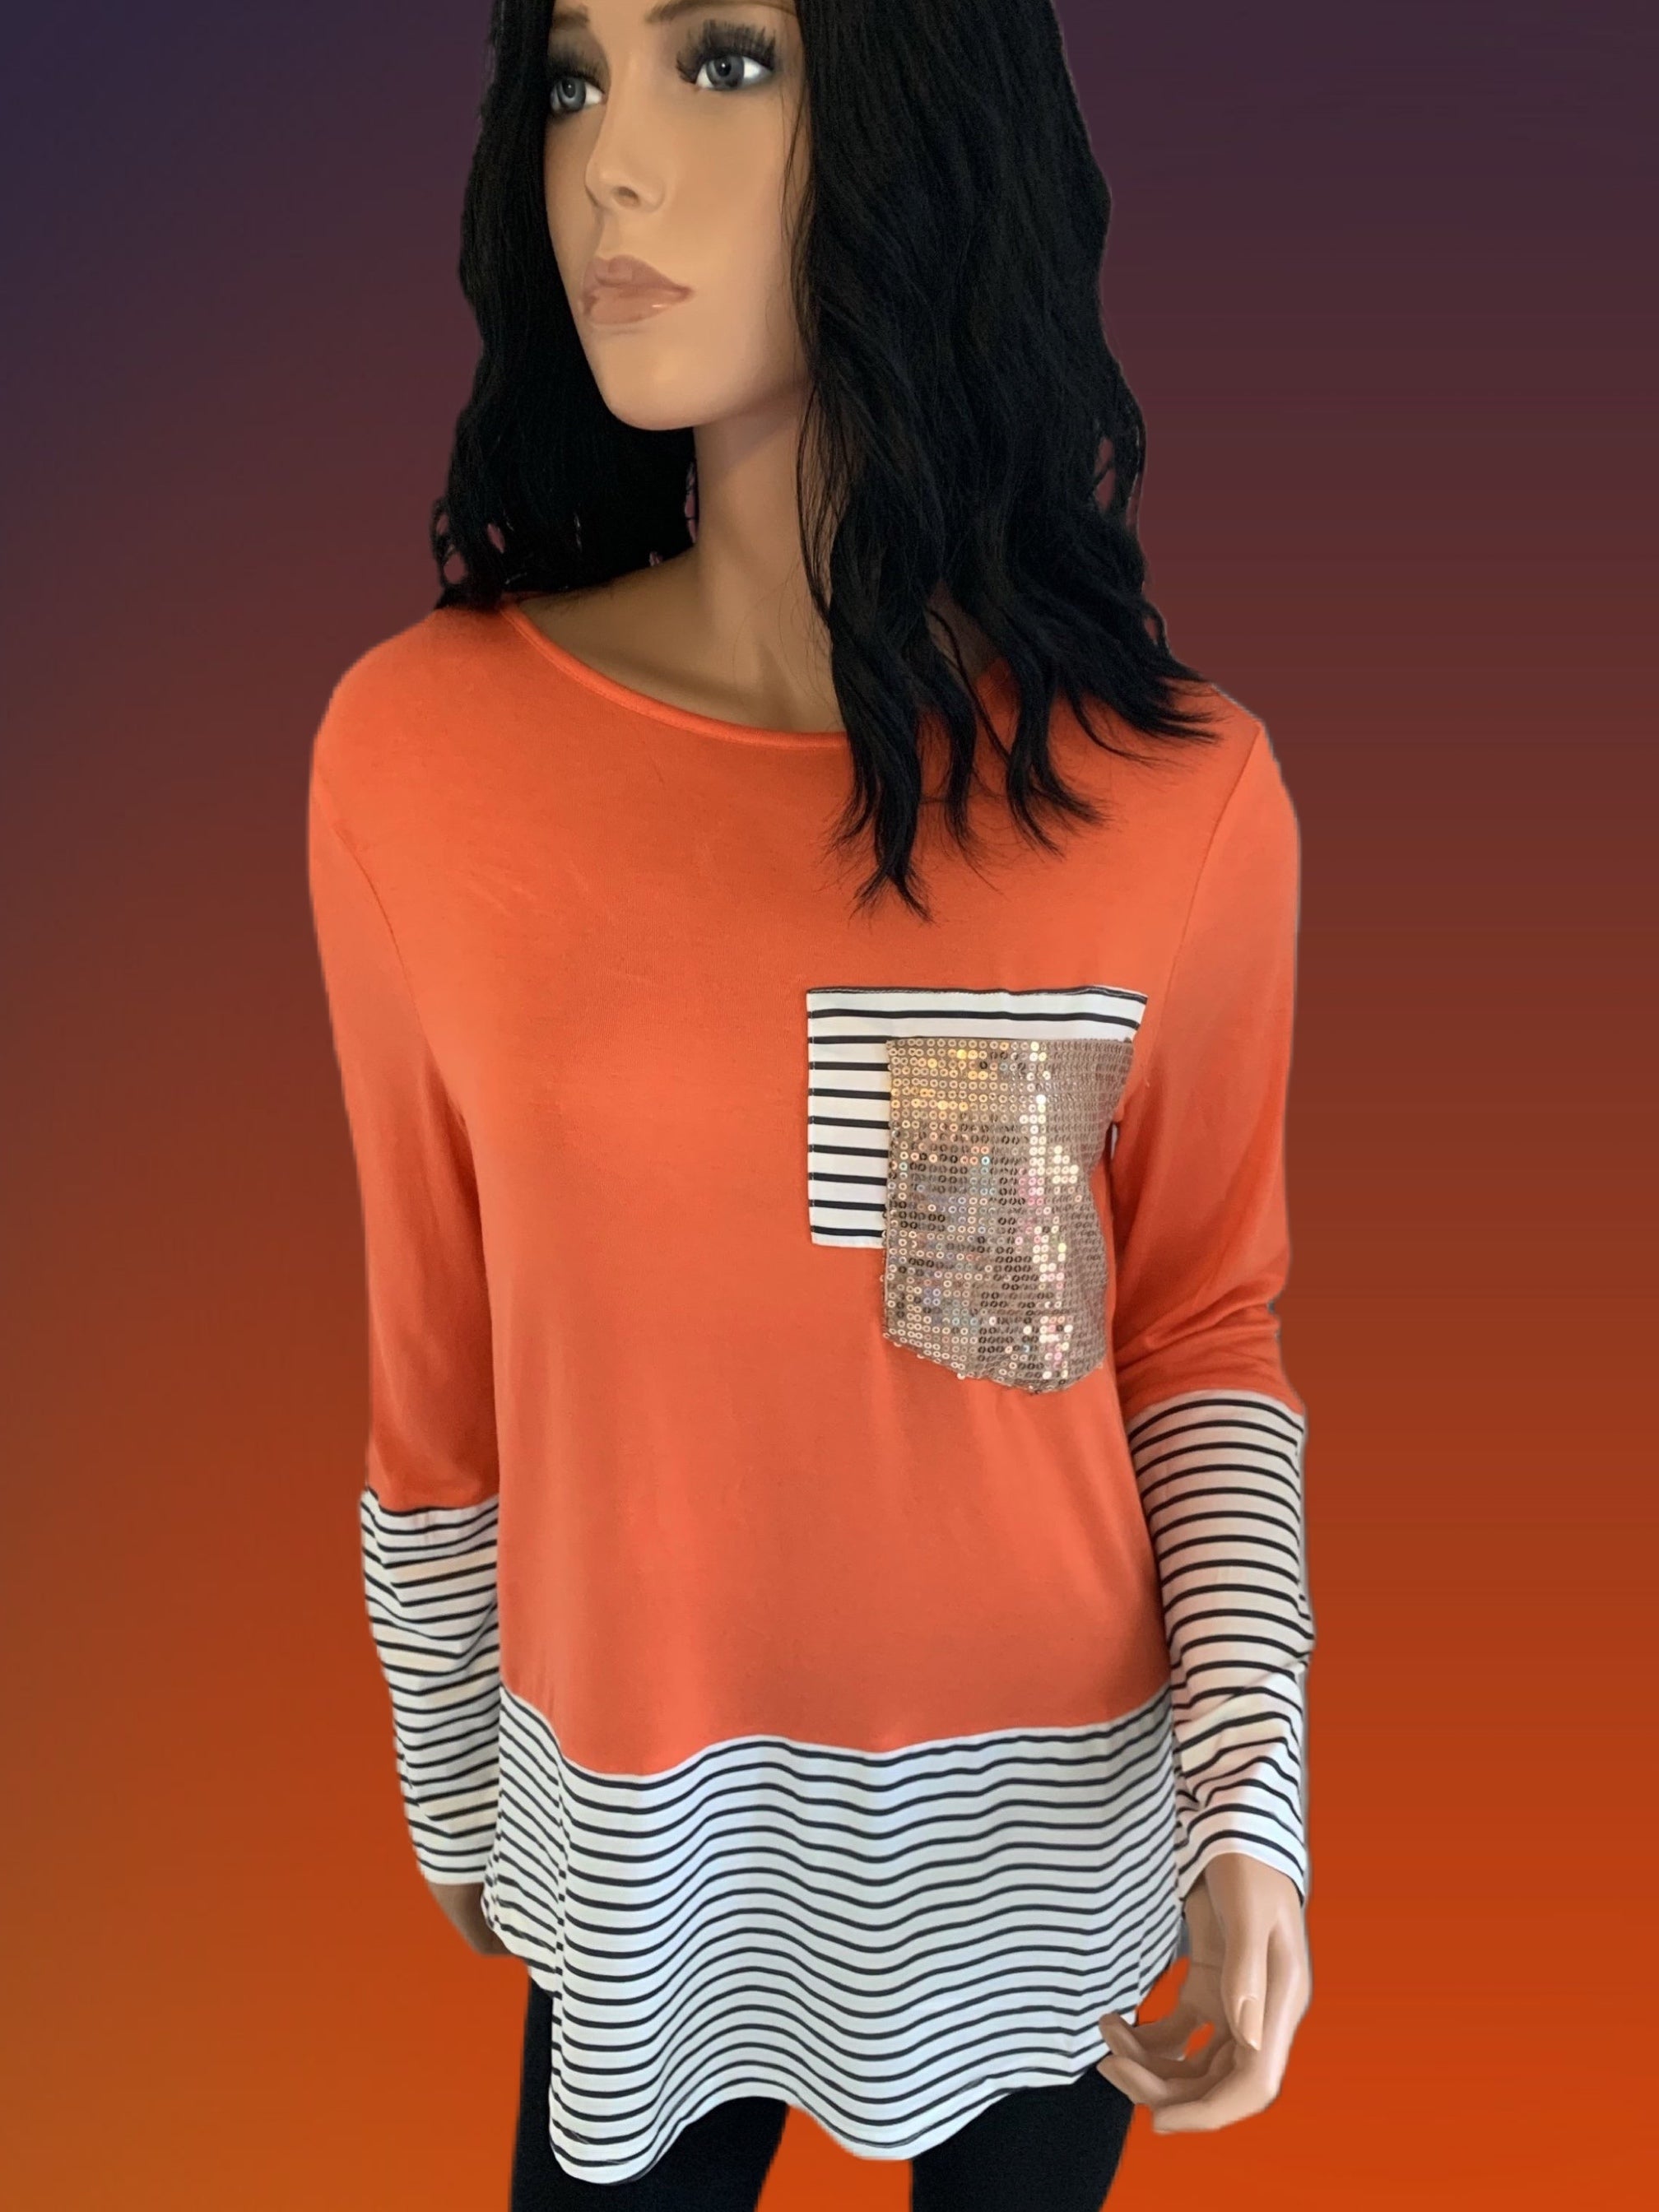 Sequined Pocket Splicing Long Sleeve Top